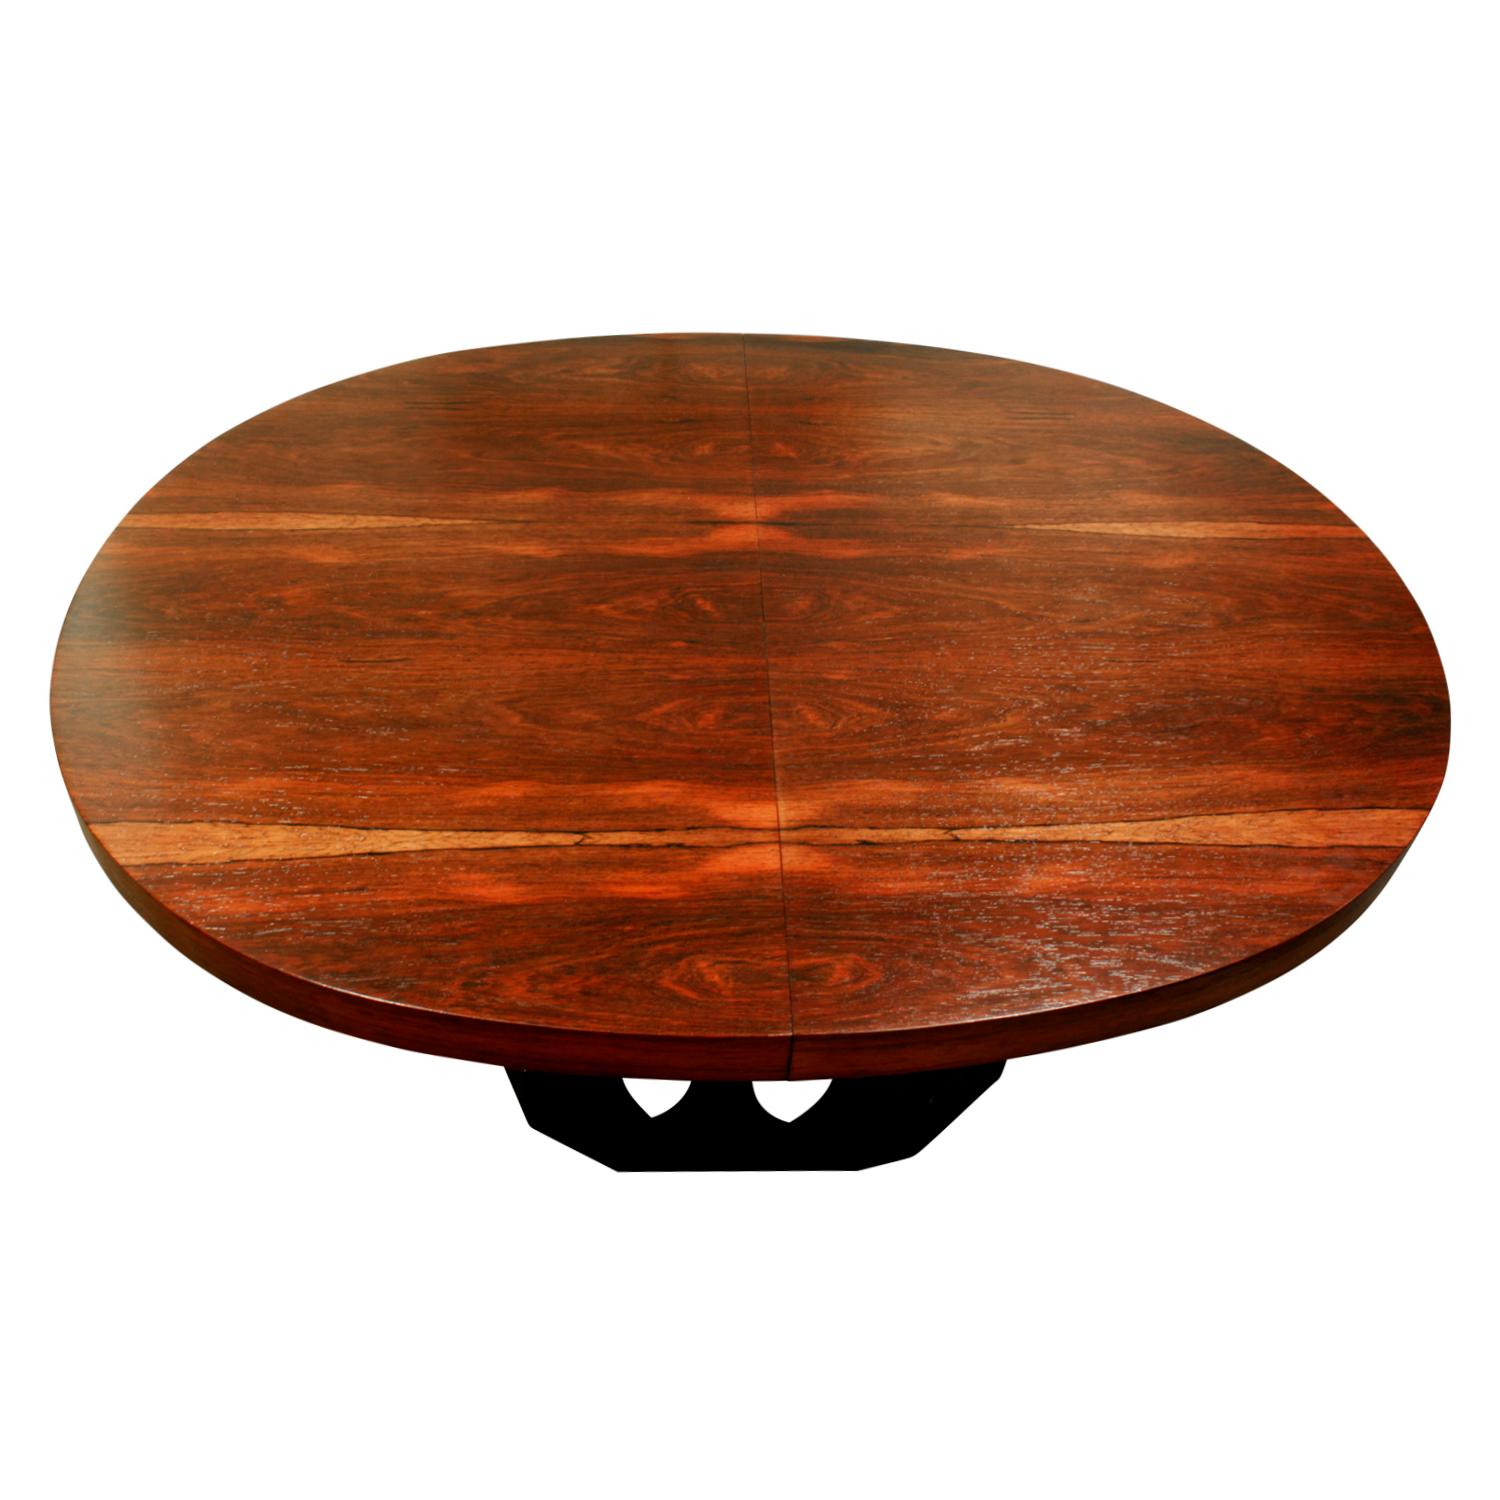 Dining table model No 1287 with top in Brazilian rosewood and sculptural base in mahogany by Harvey Probber, American, 1950s. Dining table comes with three leaves. Harvey Probber's craftsmanship is unsurpassed and this table has been completely